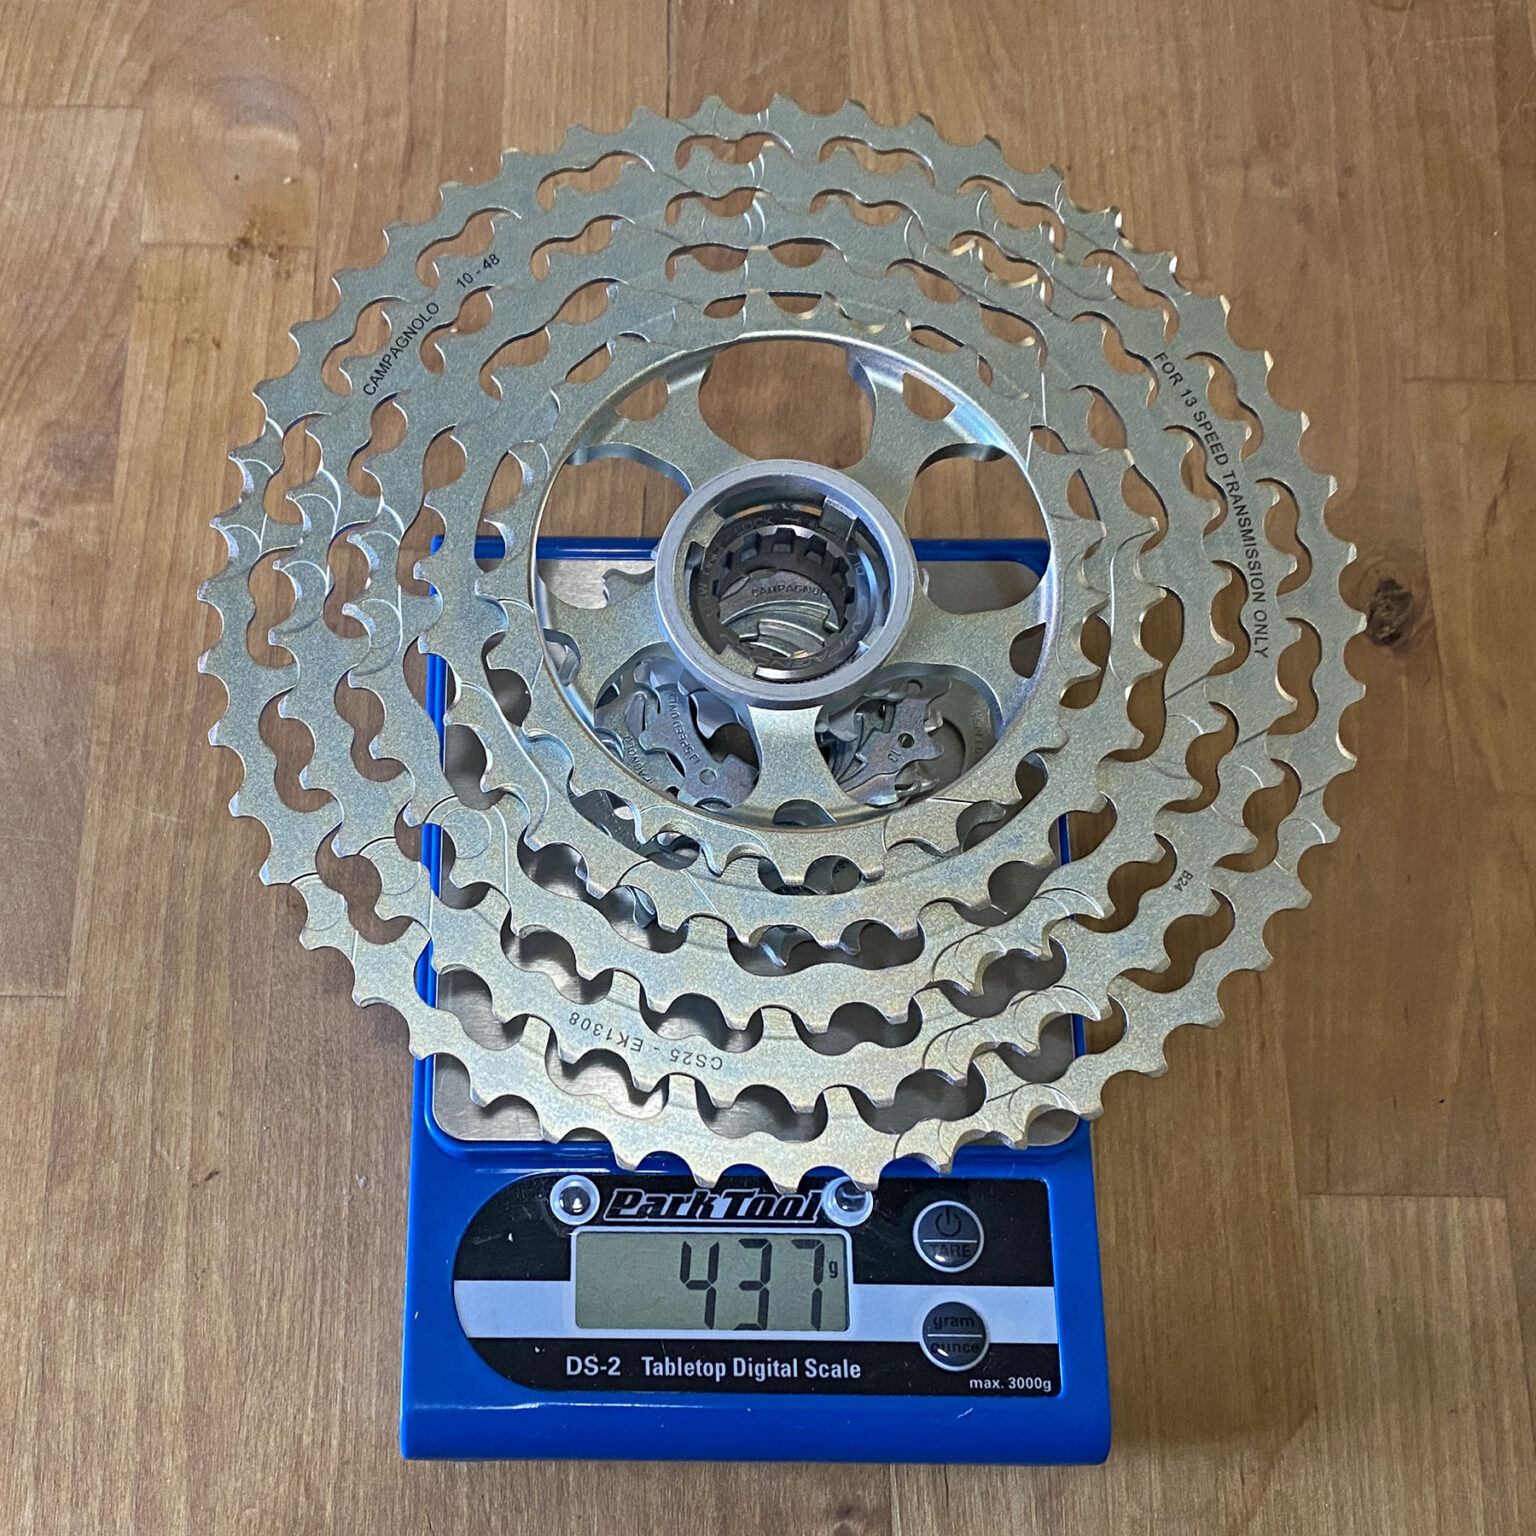 Campagnolo Ekar GT actual weights, affordable Campy gravel group, 10-48T cassette